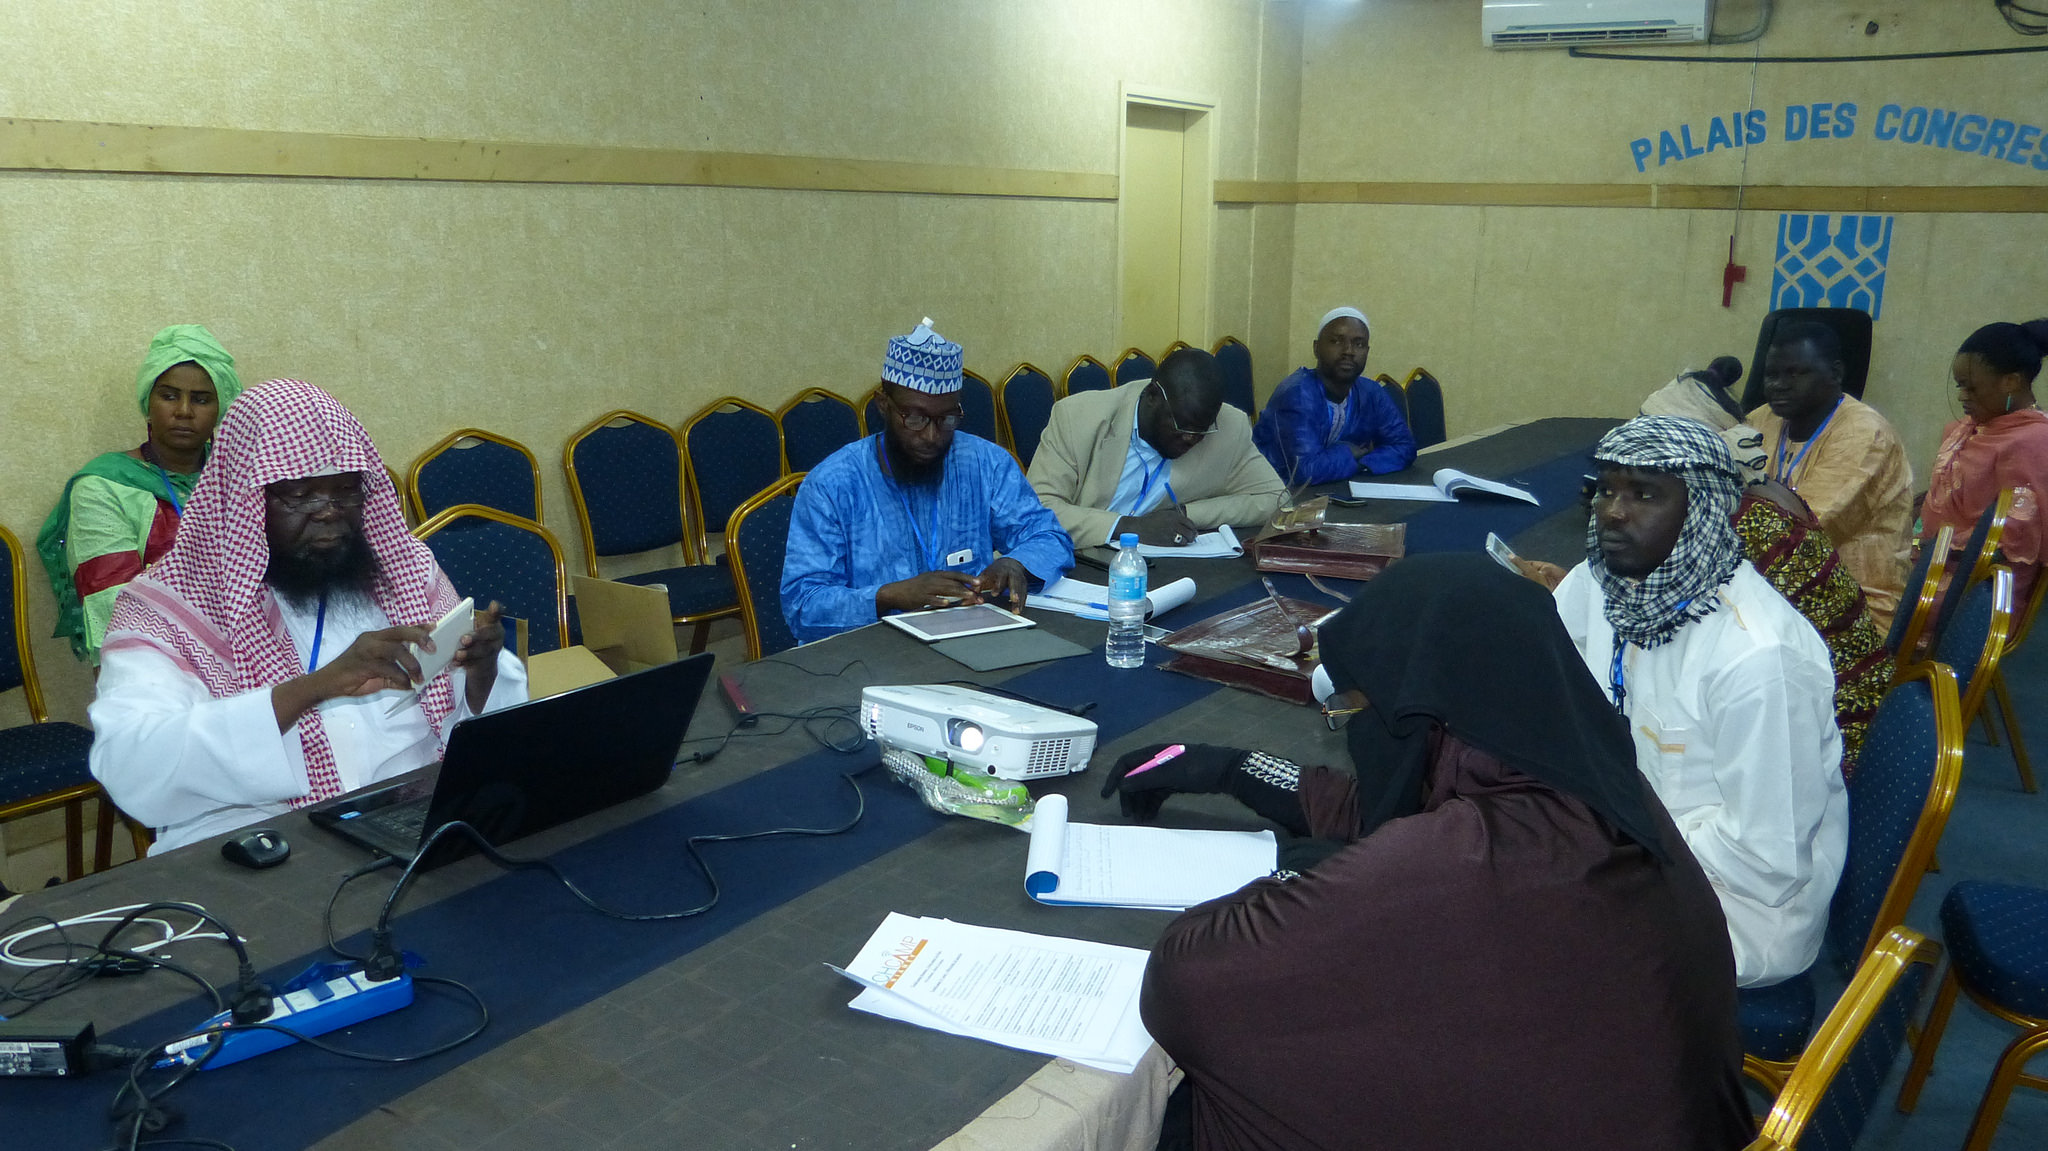 TechCamp Niger participants and trainers work on using technology solutions to promote peace.